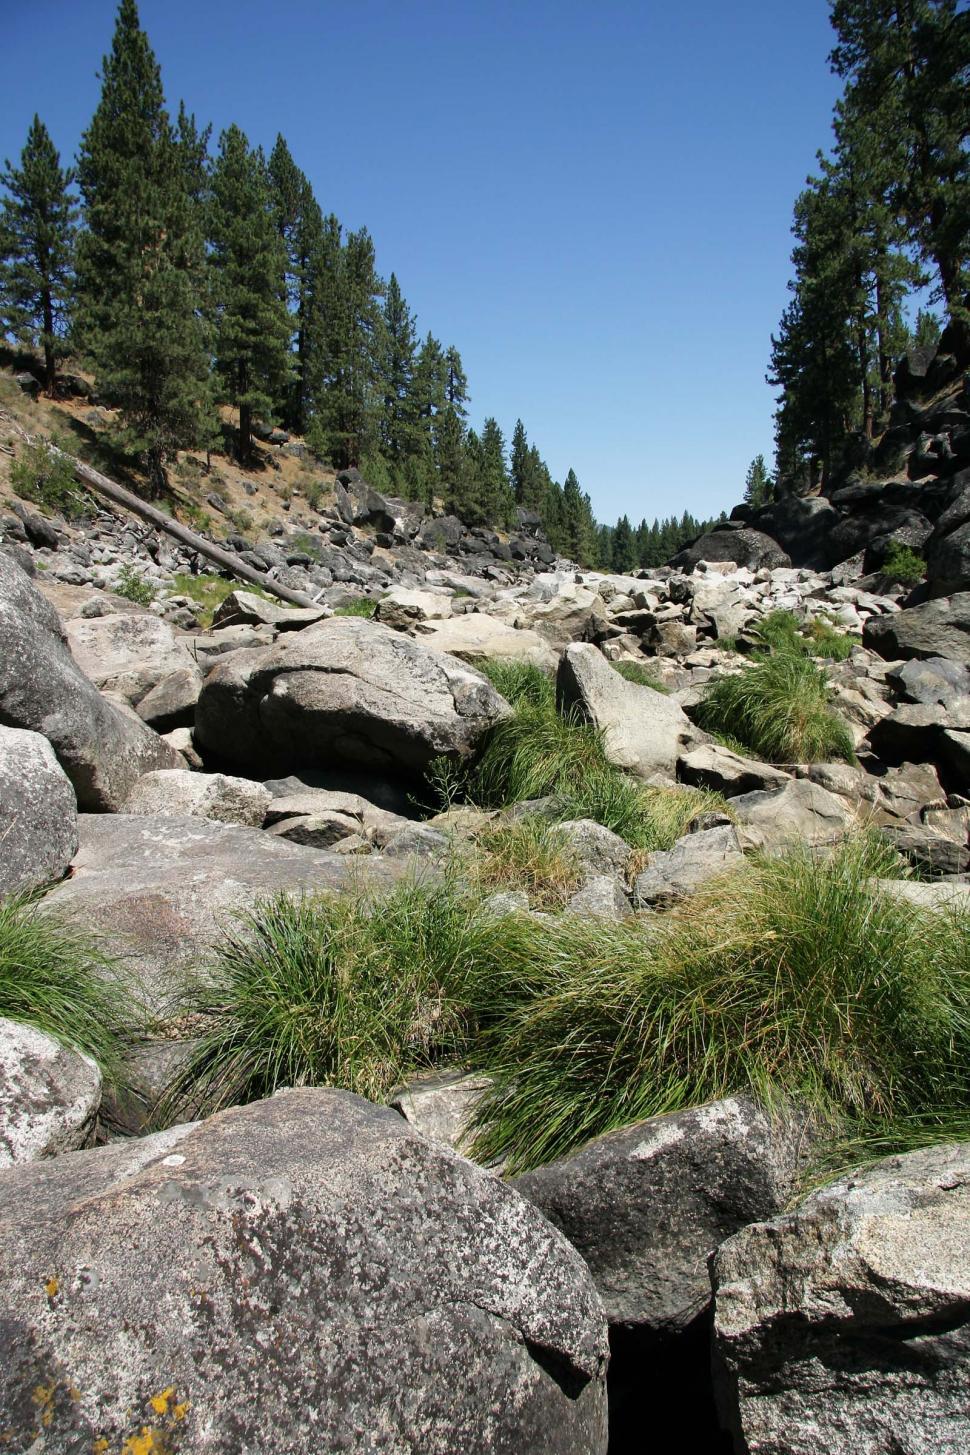 Free Image of river gorge feather california stream rocks rugged trees pine tree water wilderness bed riverbed streambed boulder boulders canyon 